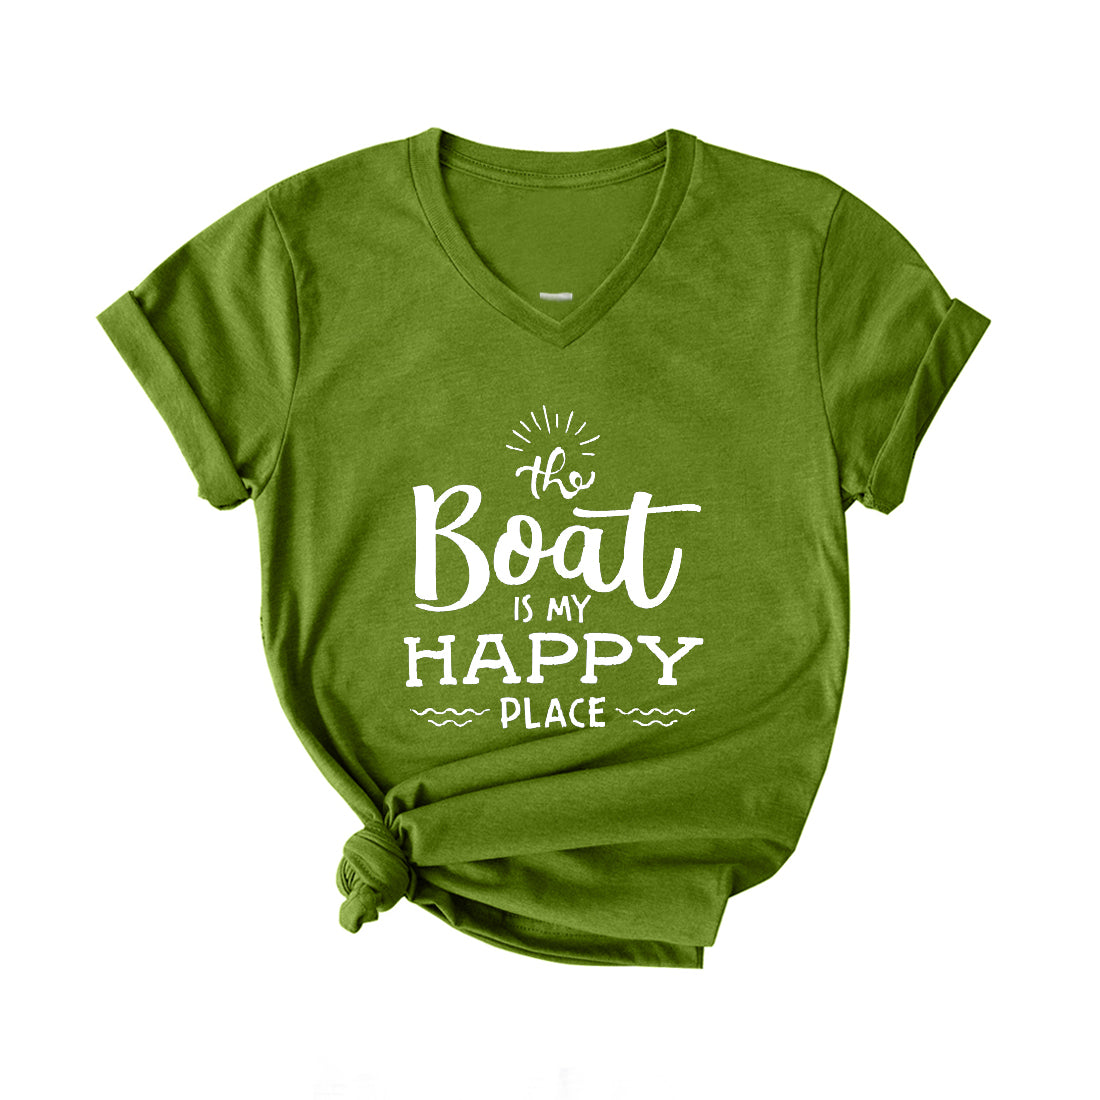 THE BOAT IS MY HAPPY PLACE V Neck T-Shirt for Women